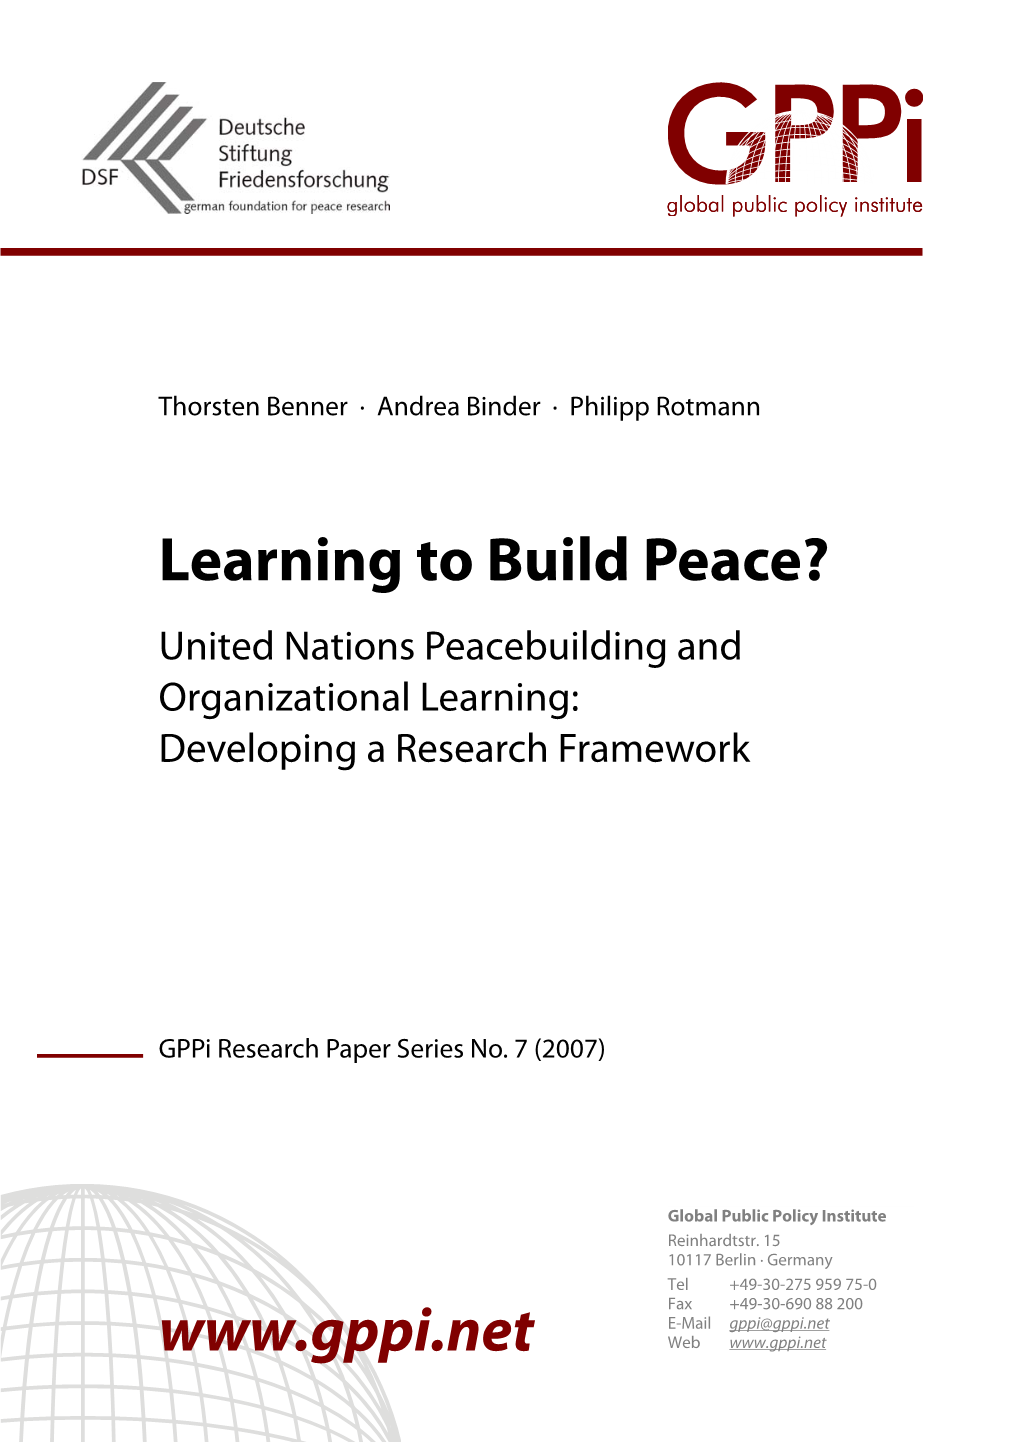 Learning to Build Peace? Developing a Research Framework 2